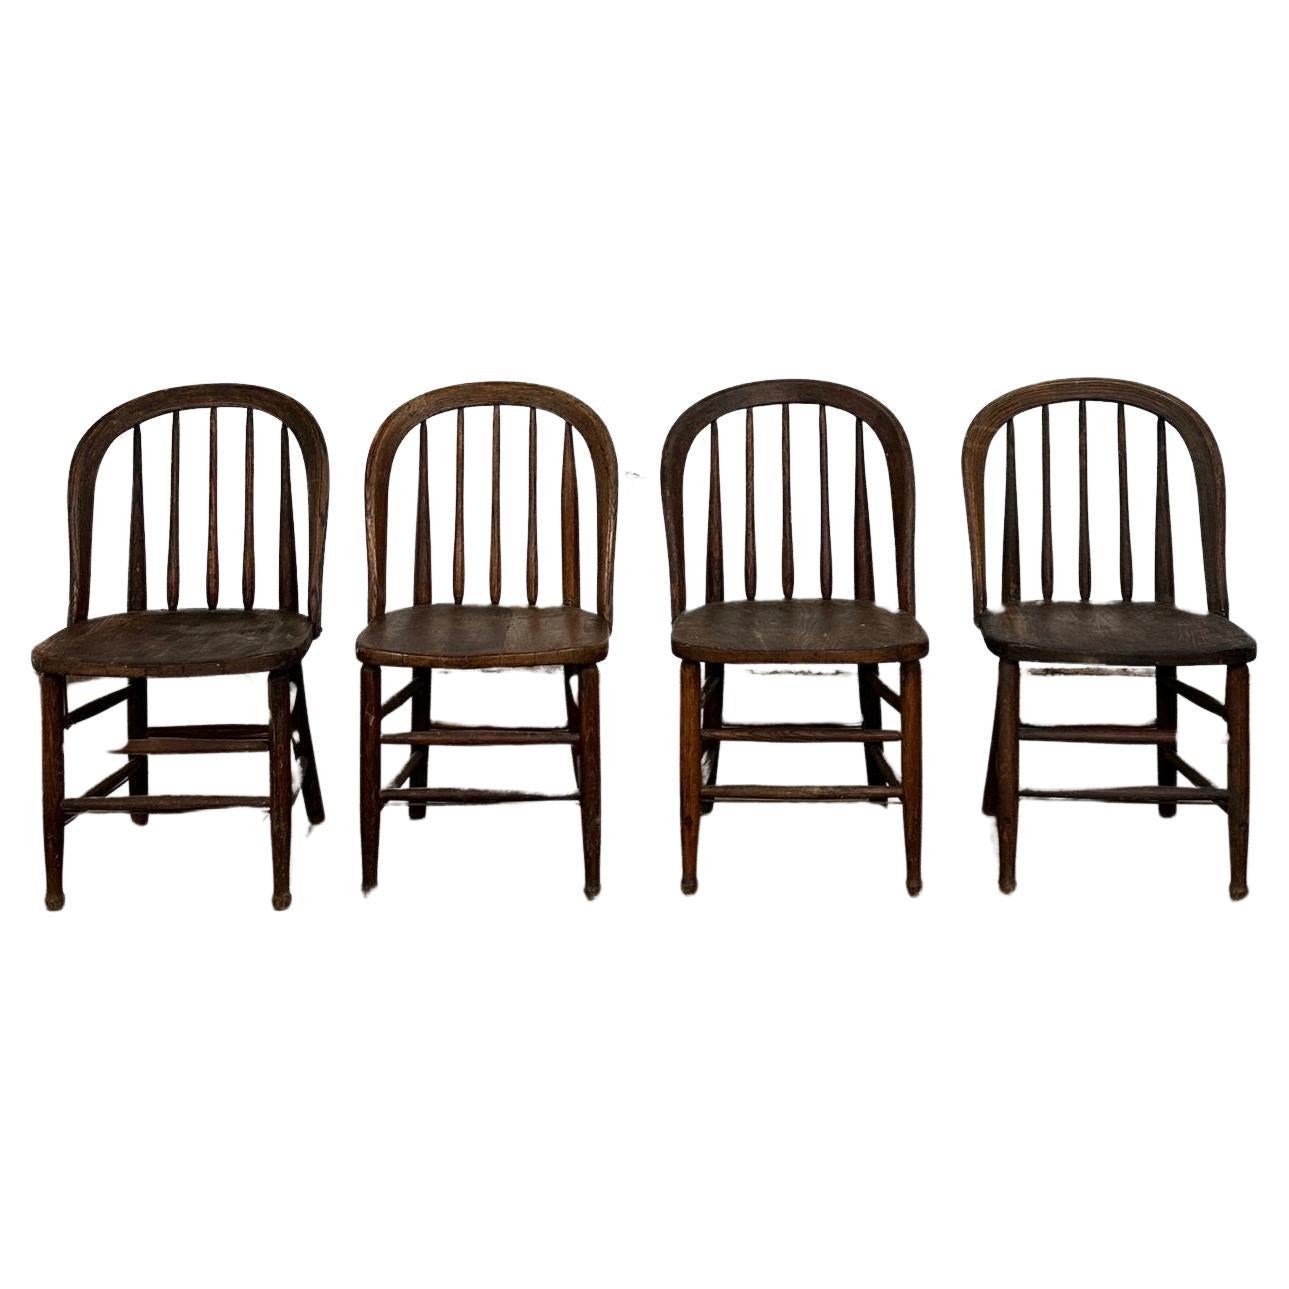 Vintage Farmhouse Spindle Chairs- Set of 4 For Sale